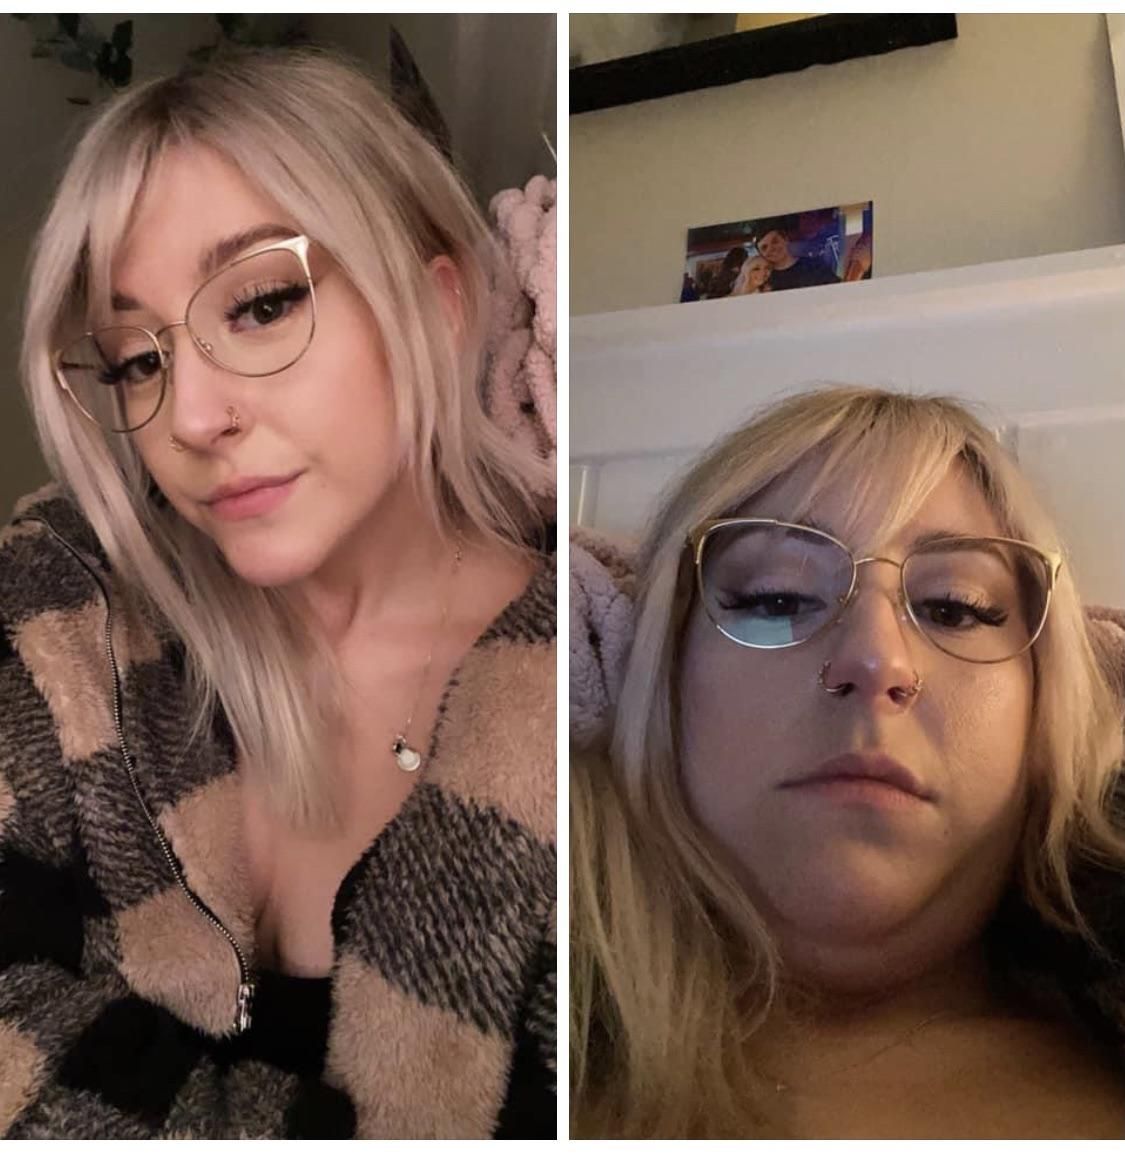 Taking a selfie vs checking out the selfie you just posted